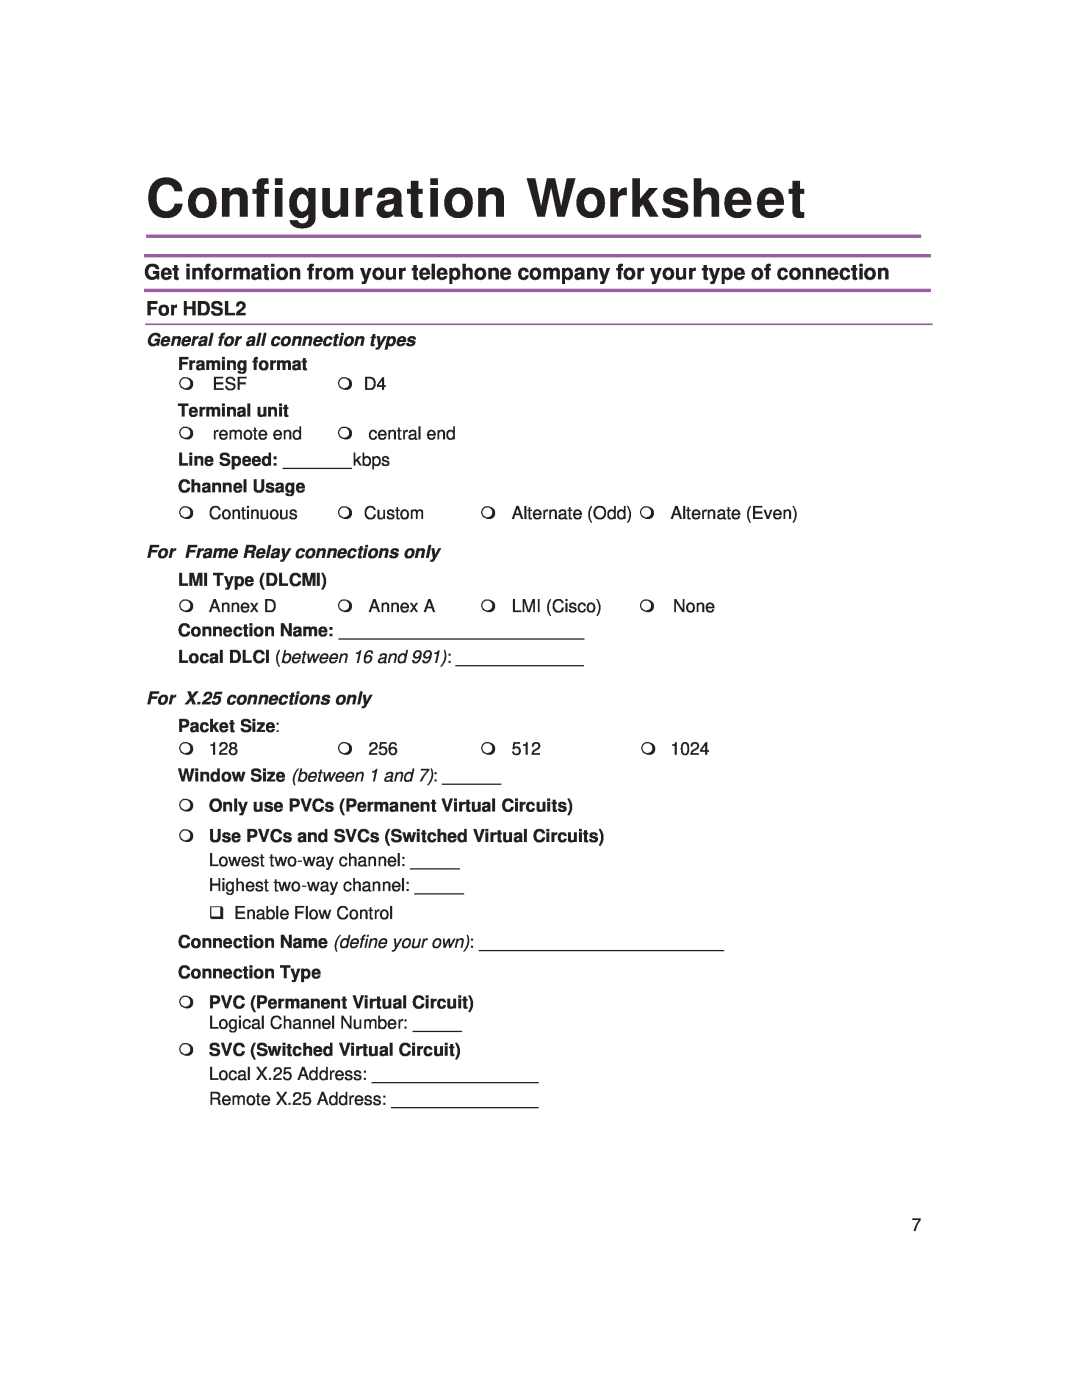 Intel 9545 Configuration Worksheet, For HDSL2, General for all connection types, For Frame Relay connections only 